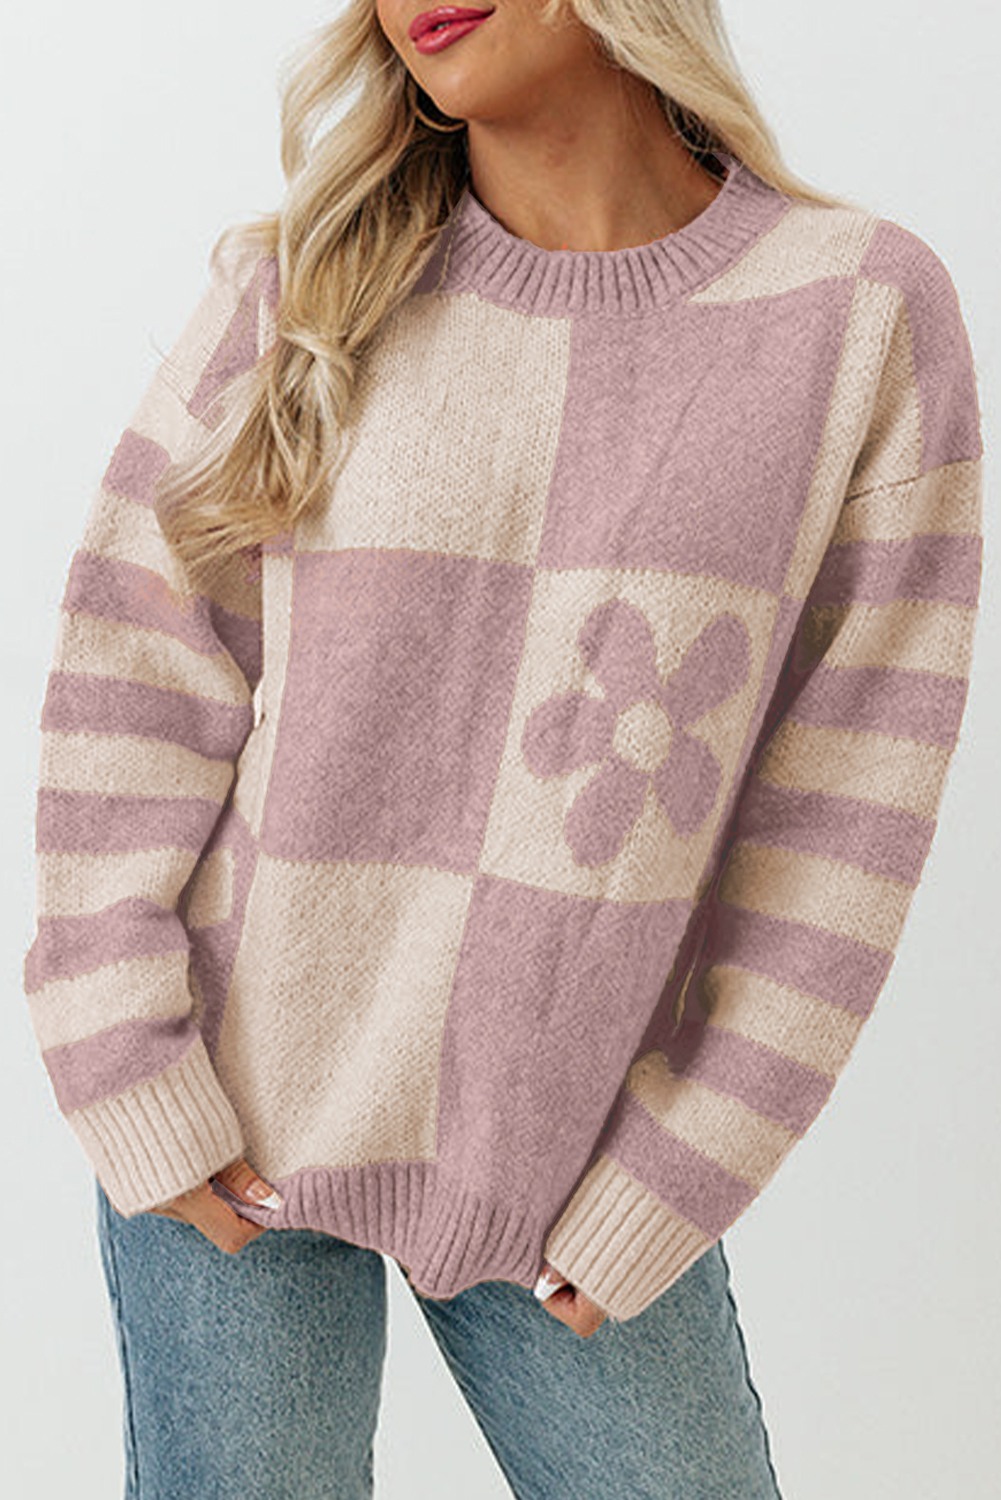 Shewin Wholesale Southern Clothing  Purple Orchid Petal Checkered and Striped Knitted SWEATER